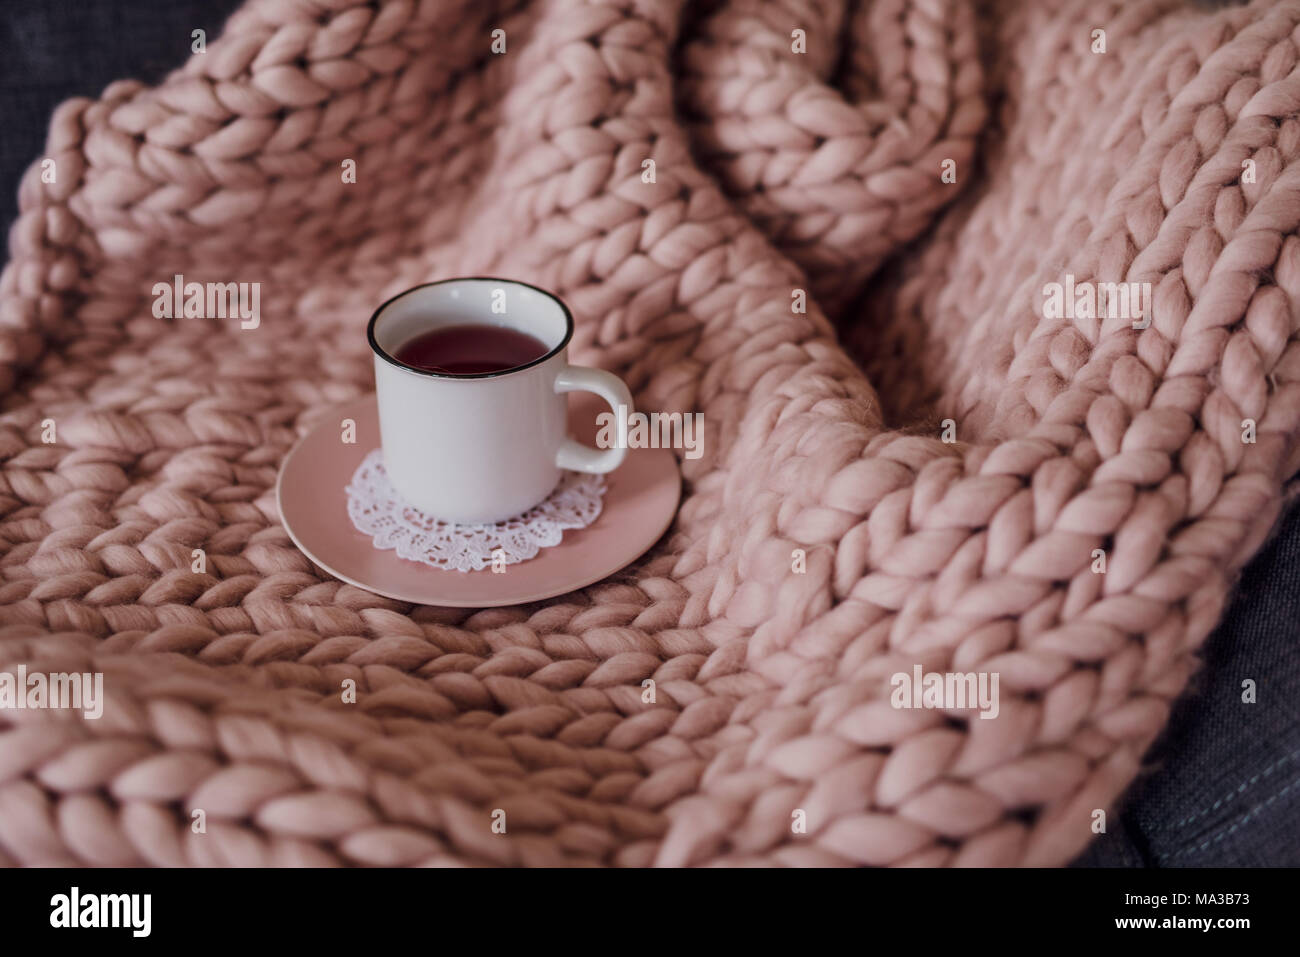 Sofa with blanket and teacup,detail, Stock Photo